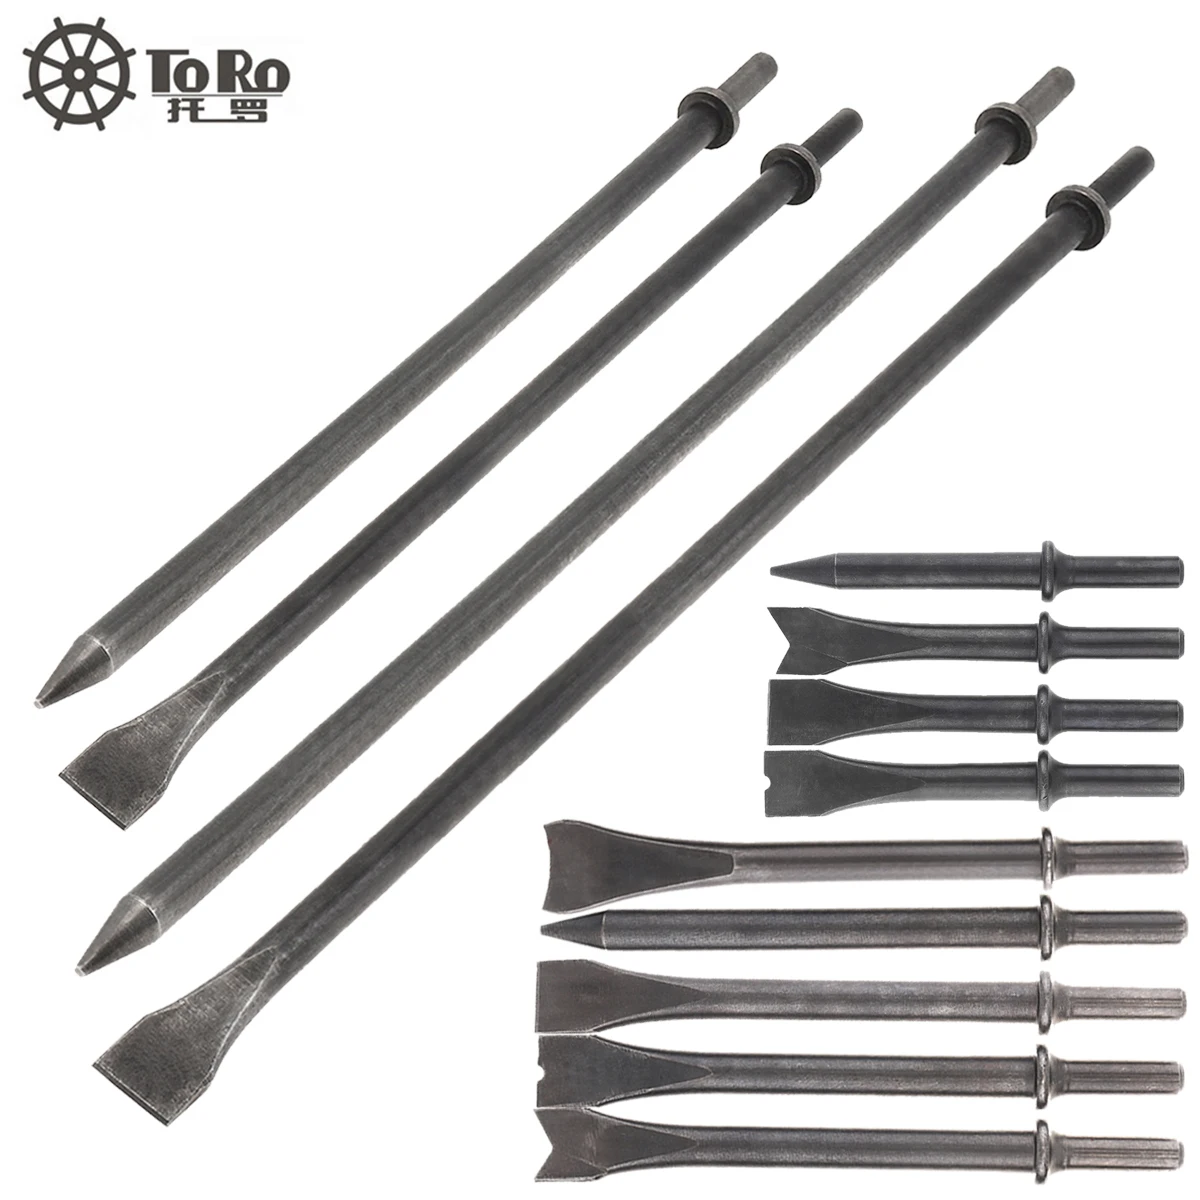 tire removal tools pneumatic socket wrench head 10pcs 1 2 drive deep impact socket set drive metric wrench socket deep repair 4/5pcs/lot Air Hammer Head Air Chisel Hard Steel Solid Impact Hammer Head Support Pneumatic Tools for Knocking / Rusting Removal